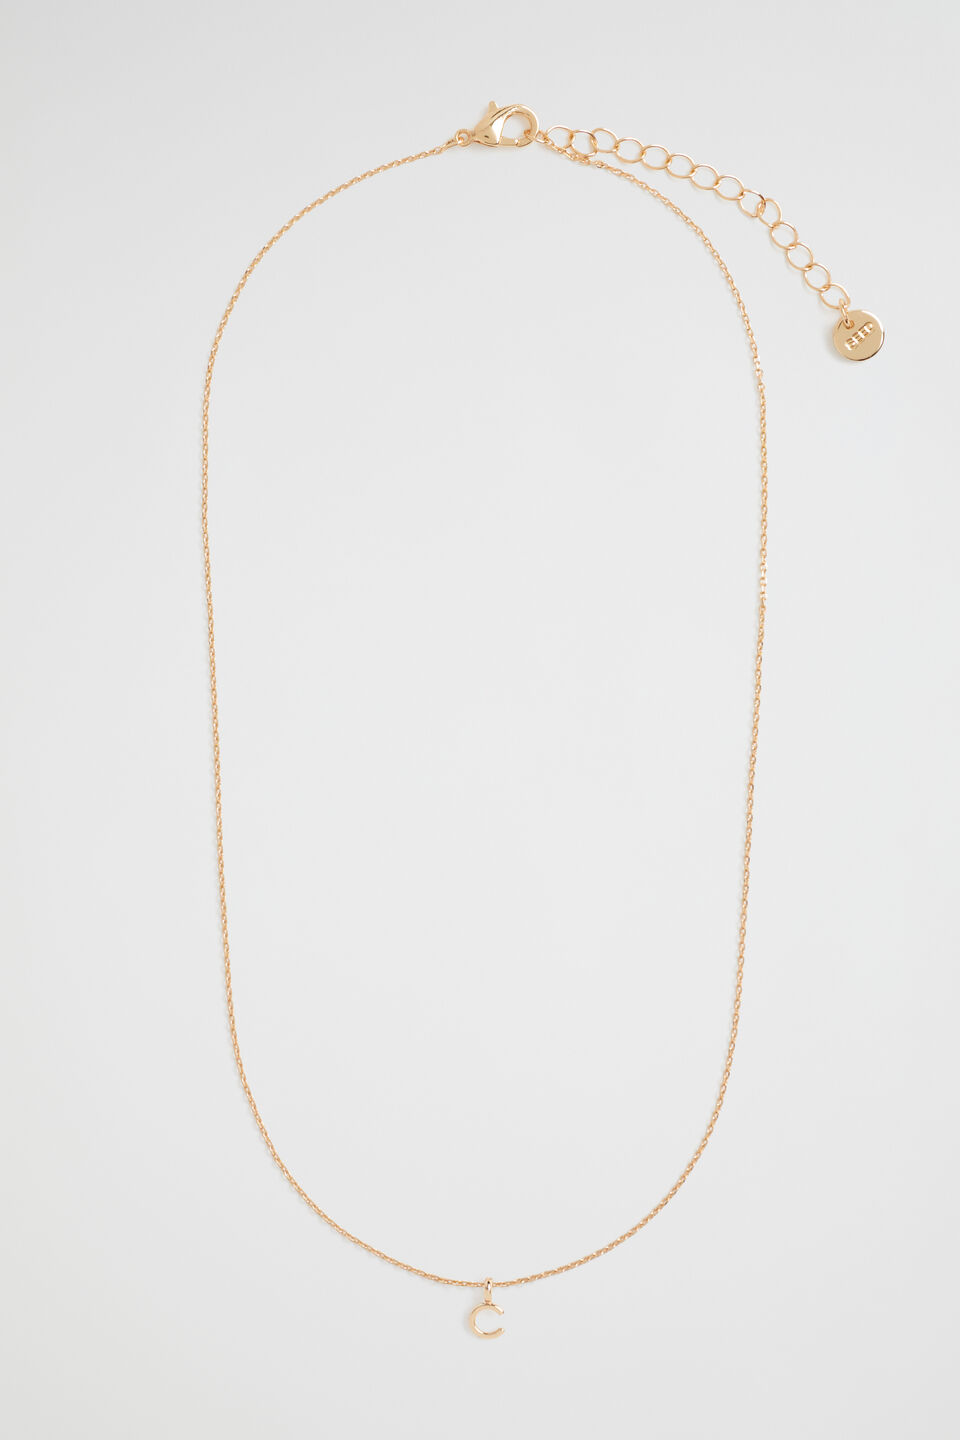 Gold Initial Necklace  C